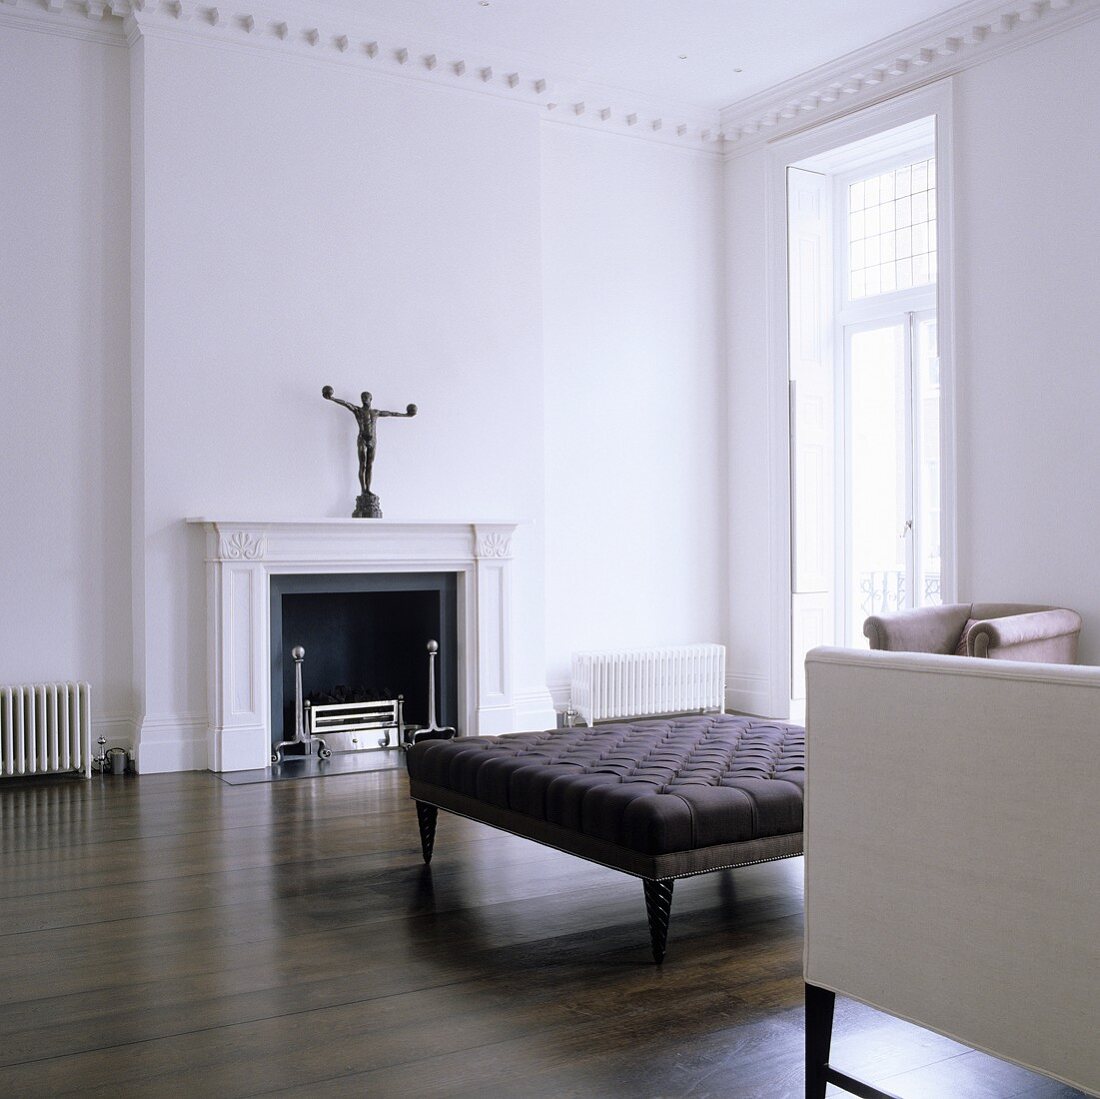 A minimalistic living room with an antique sofa on dark wooden floorboards in front of a fireplace